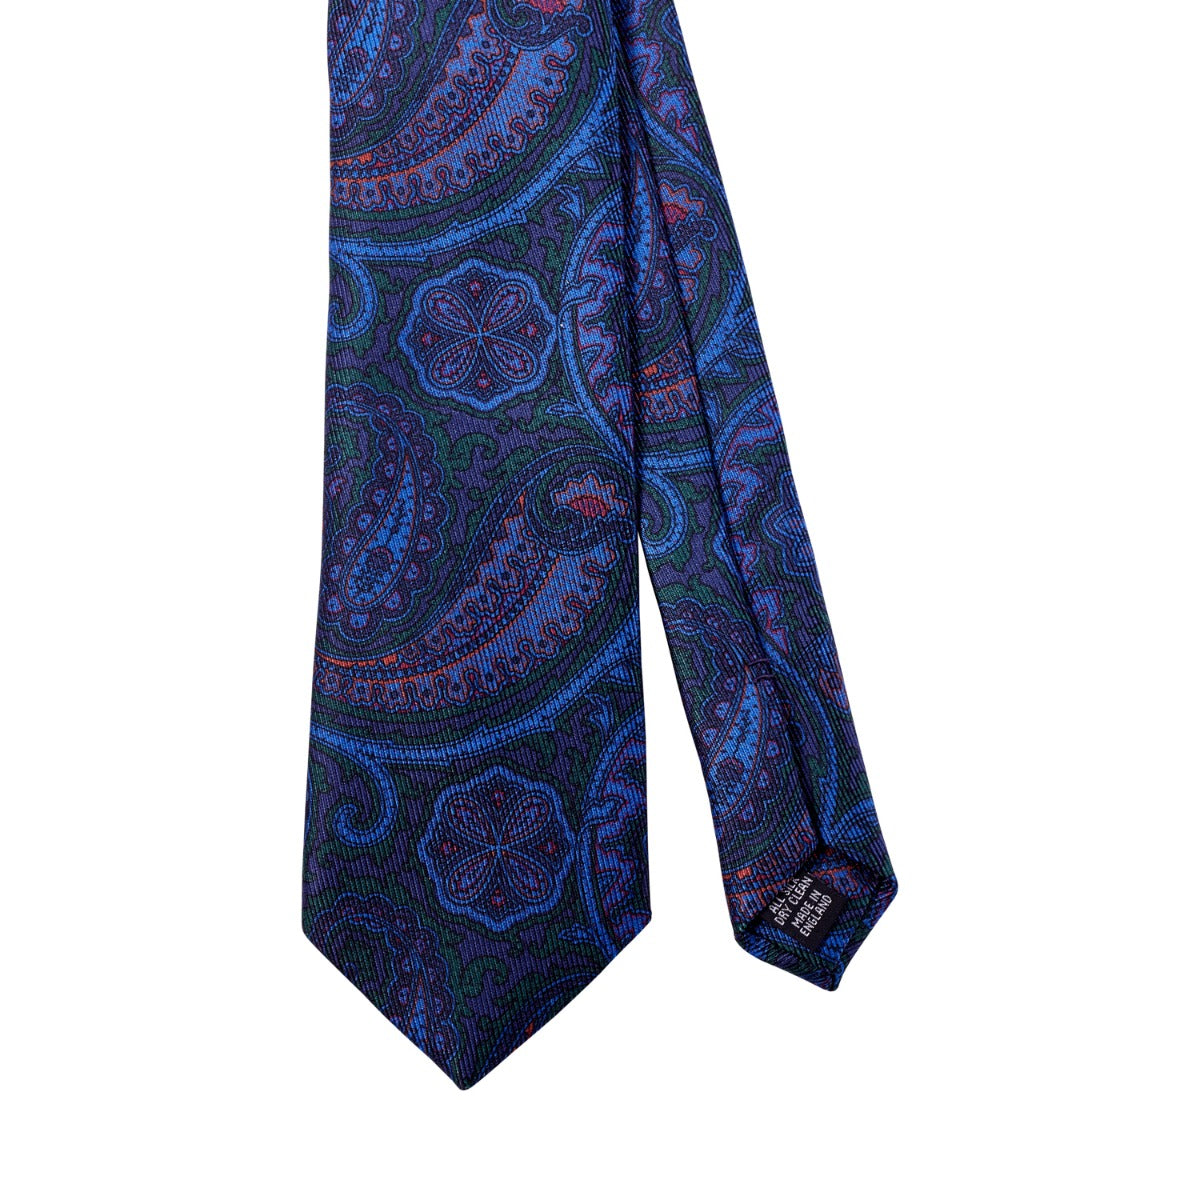 A handmade, Sovereign Grade Navy and Forest Paisley Ancient Madder Silk Tie by KirbyAllison.com on a white background.